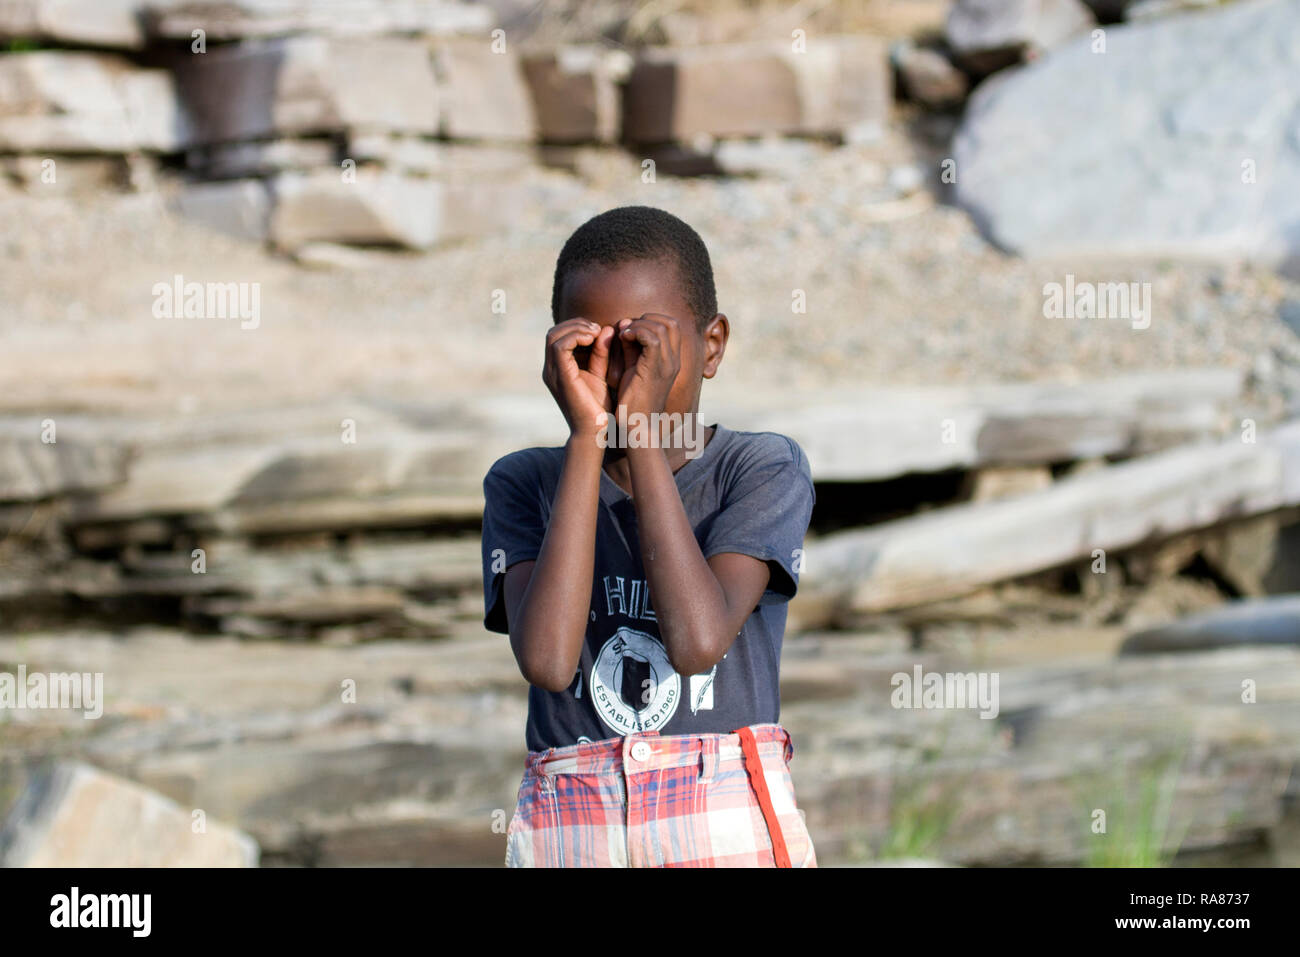 Young boy acting as he is holding a binocular at Masai village. Stock Photo